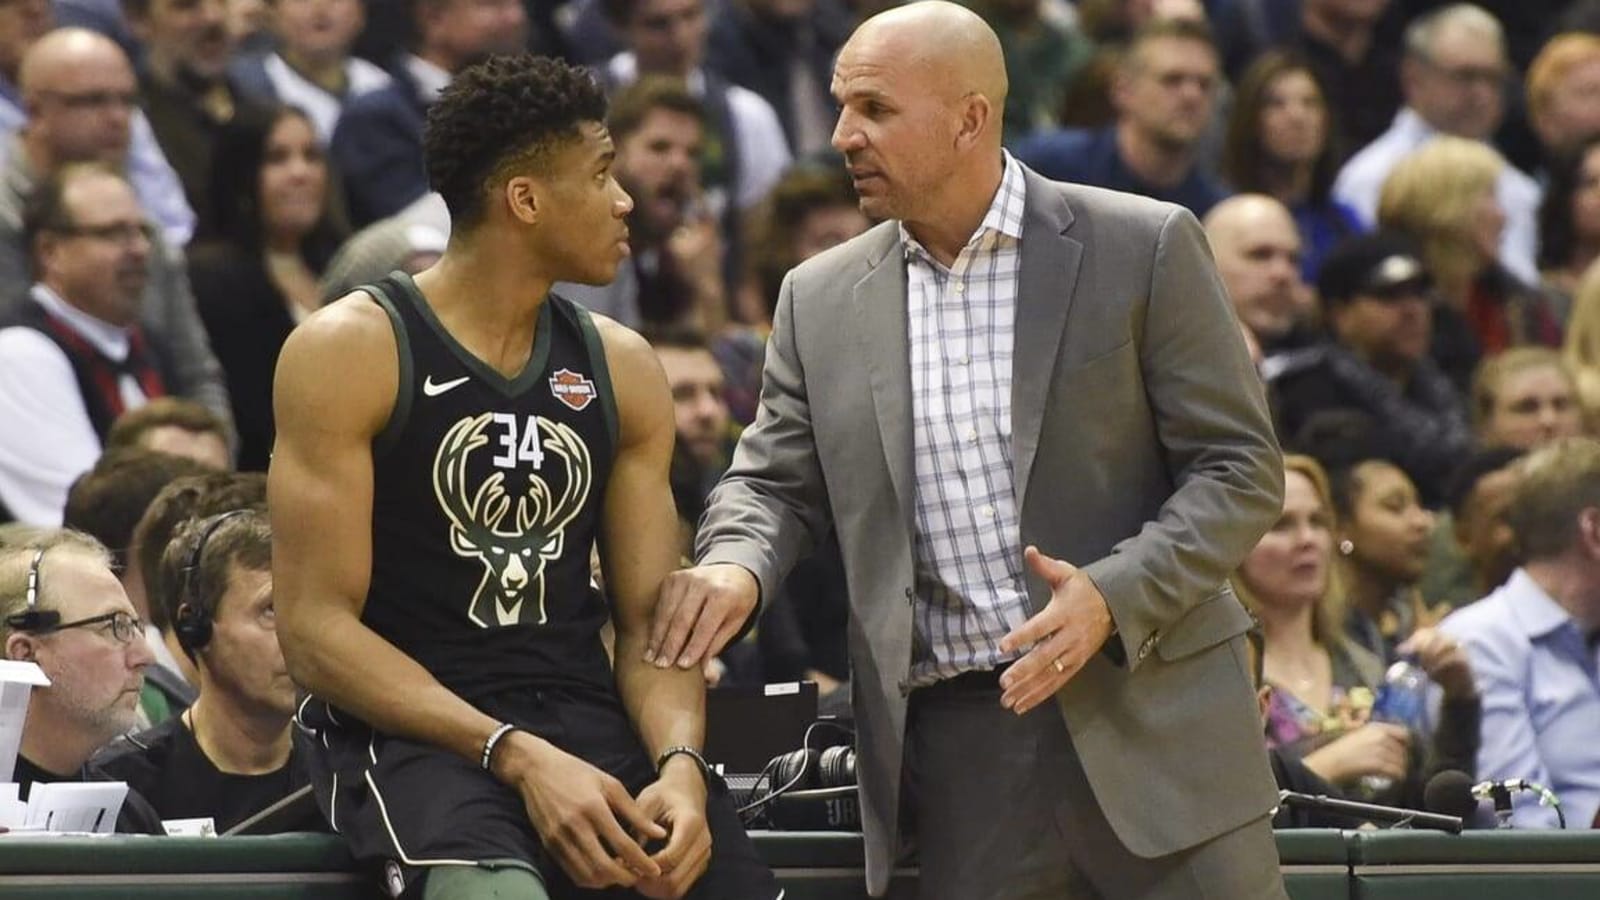 "Let’s see what this guy did in his career, anyway" - Giannis Antetokounmpo didn&#39;t know who Jason Kidd was